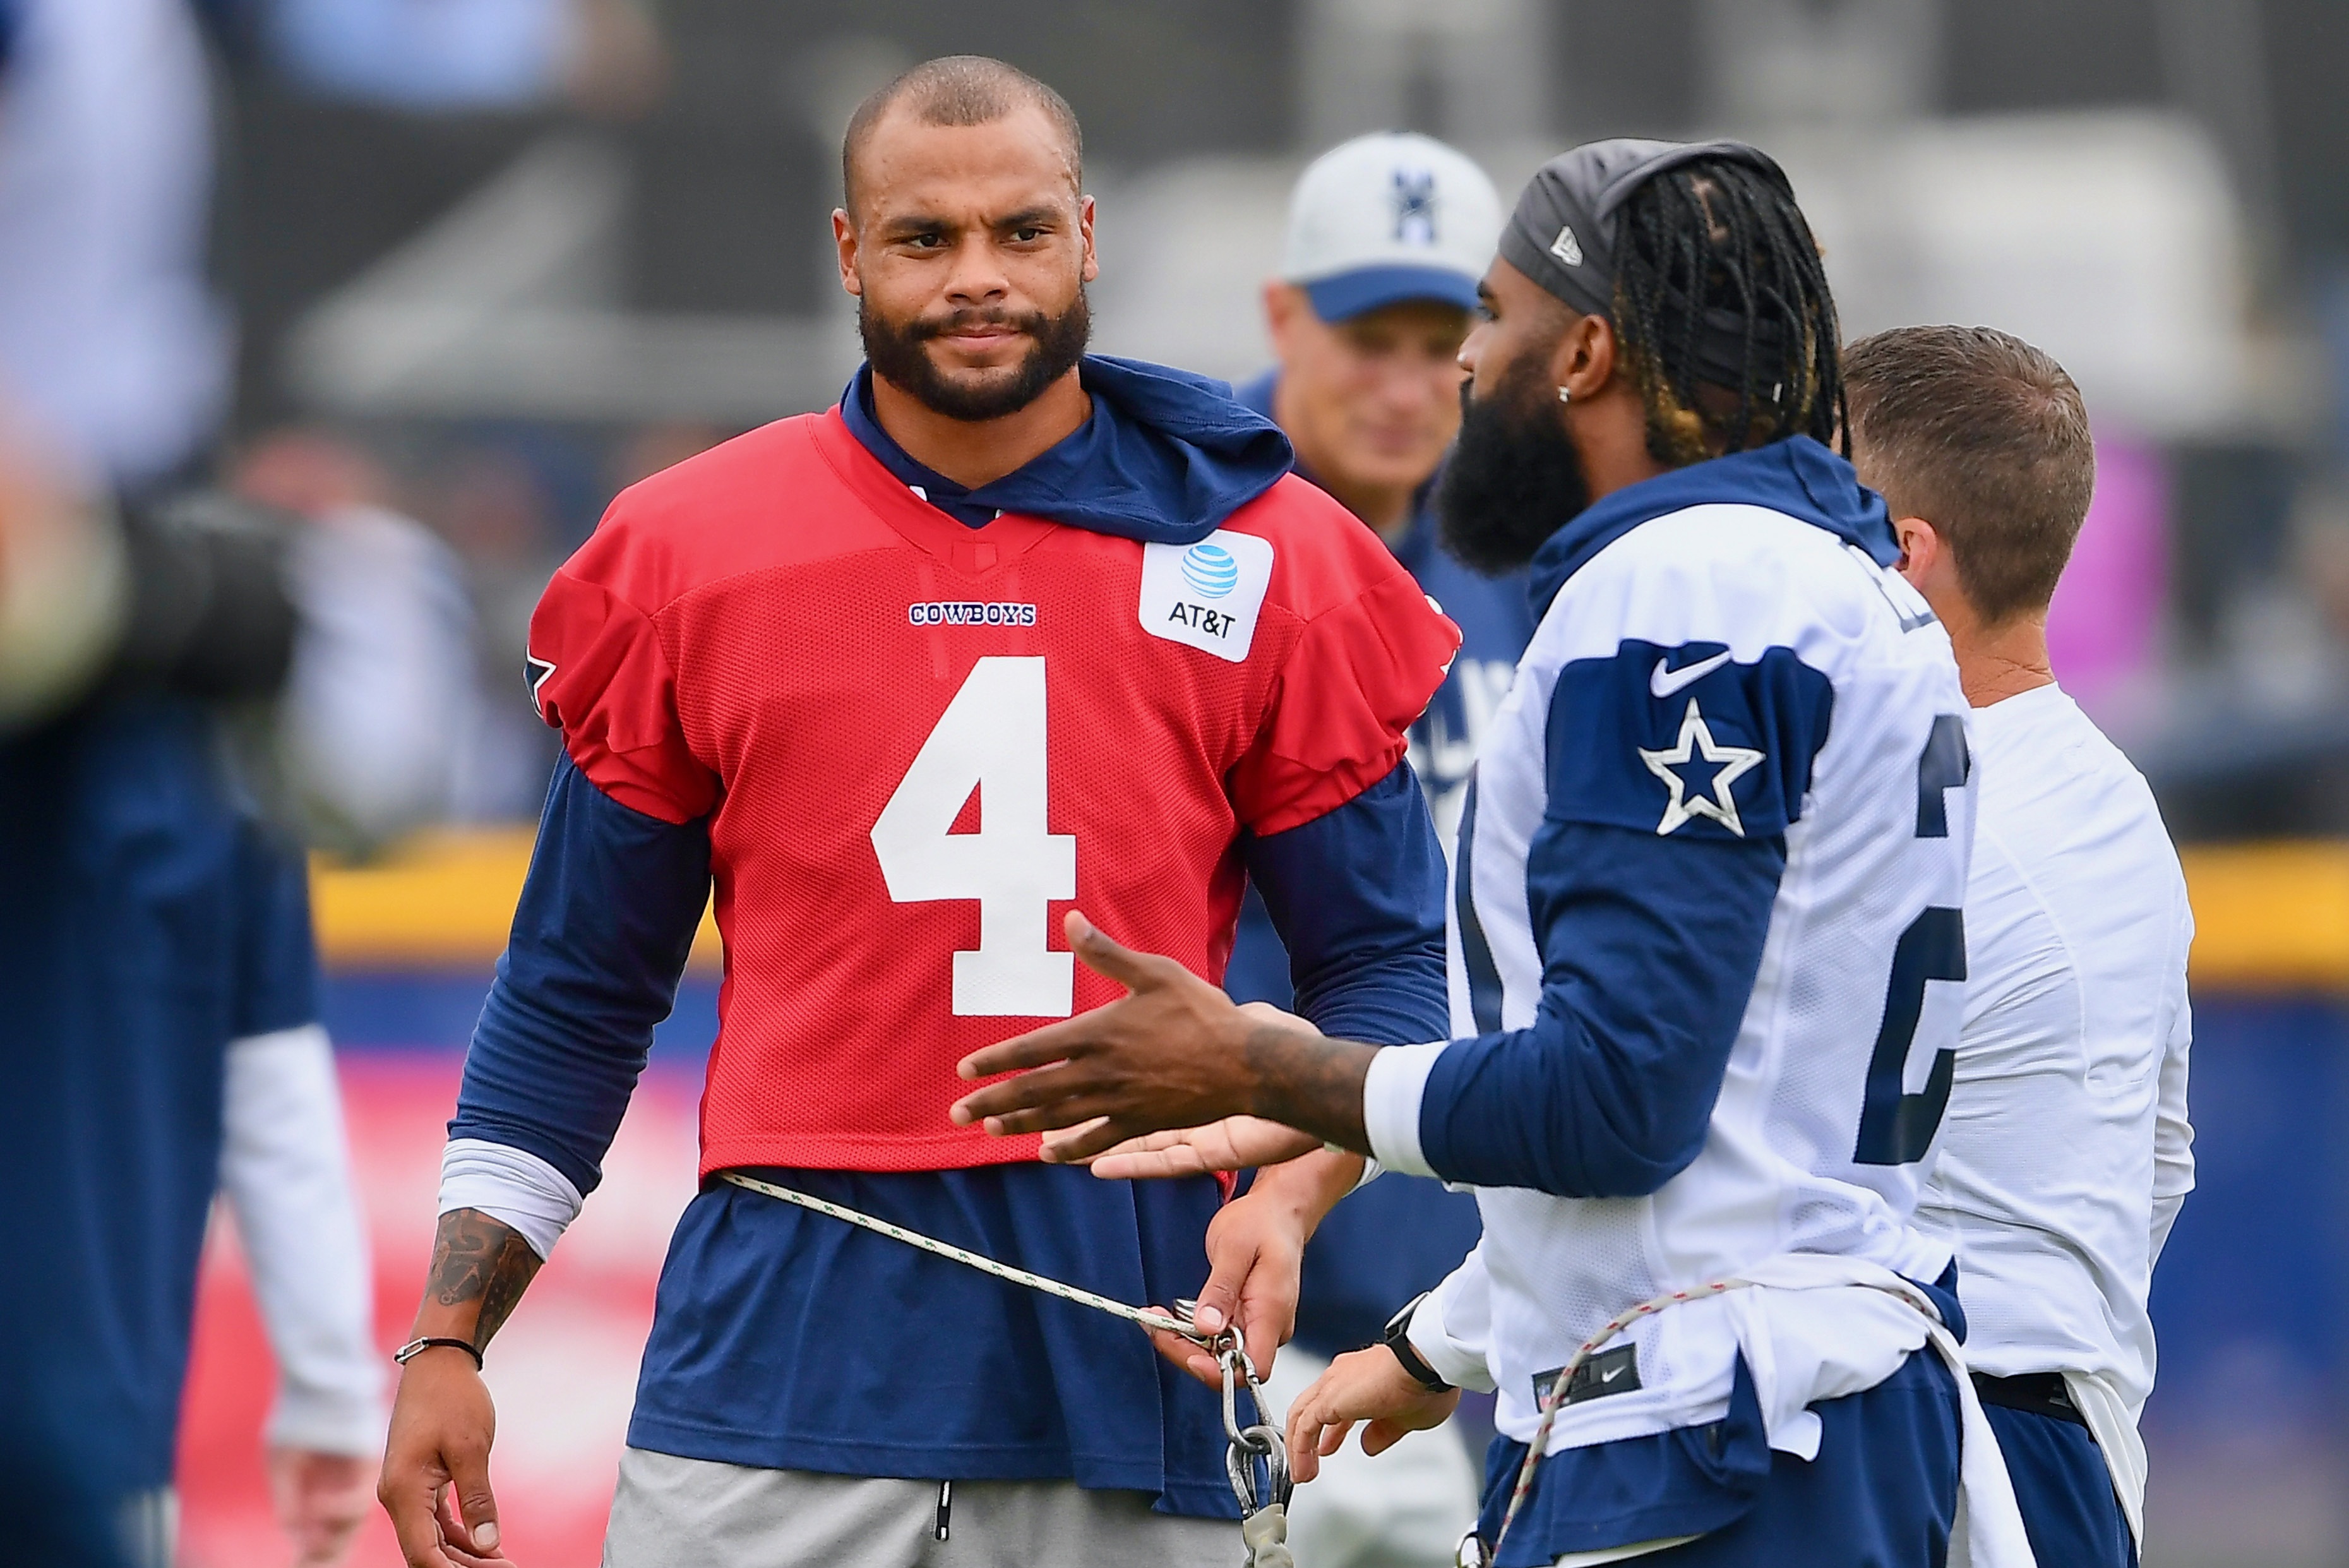 Why No One Not Even The Cowboys Saw Dak Prescott Coming Bleacher Report Latest News Videos And Highlights